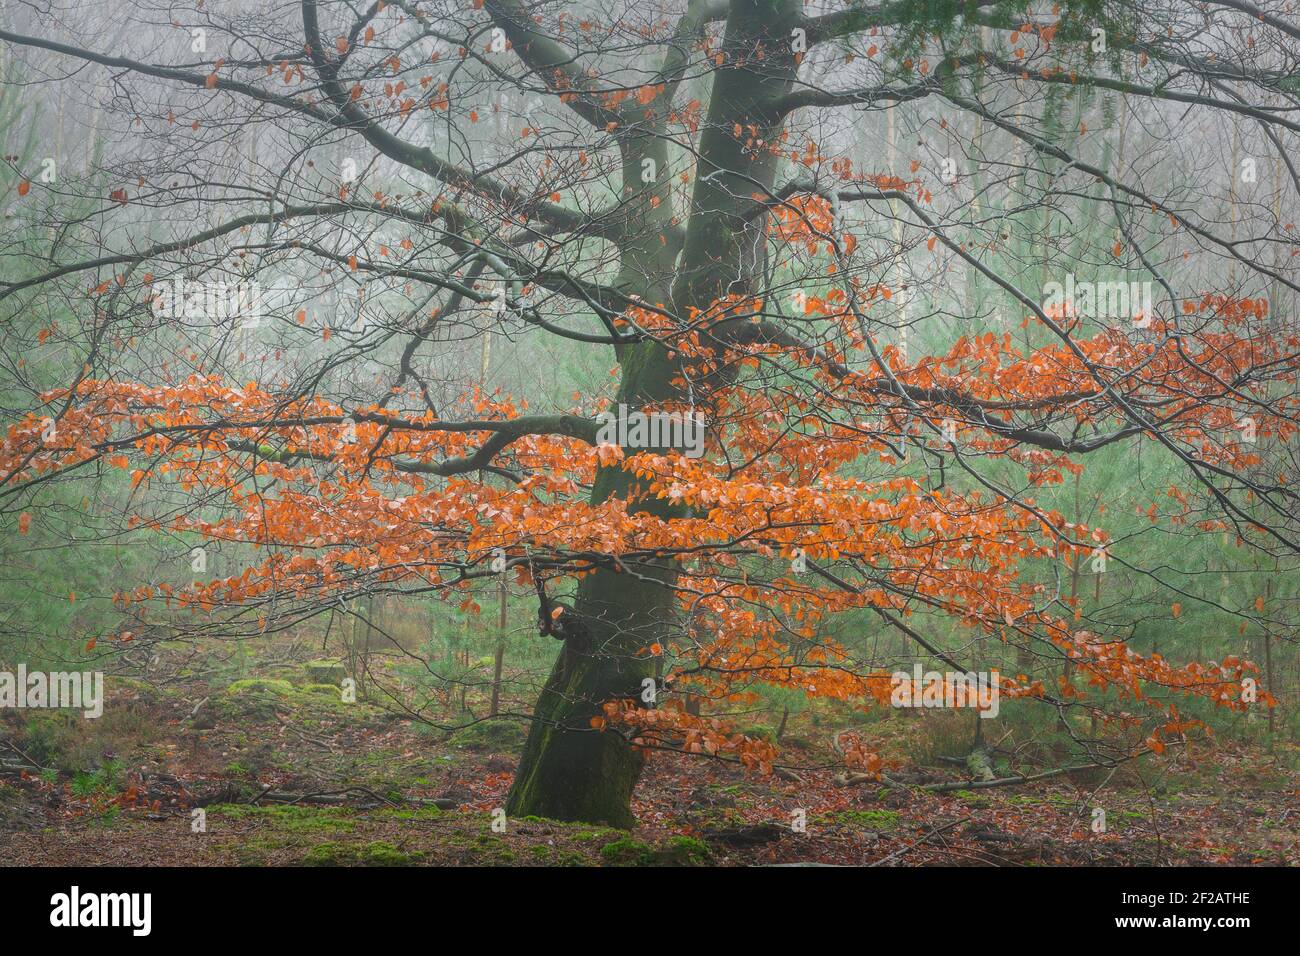 Beech tree in autumn colors on a misty morning, Veluwe, Netherlands Stock Photo